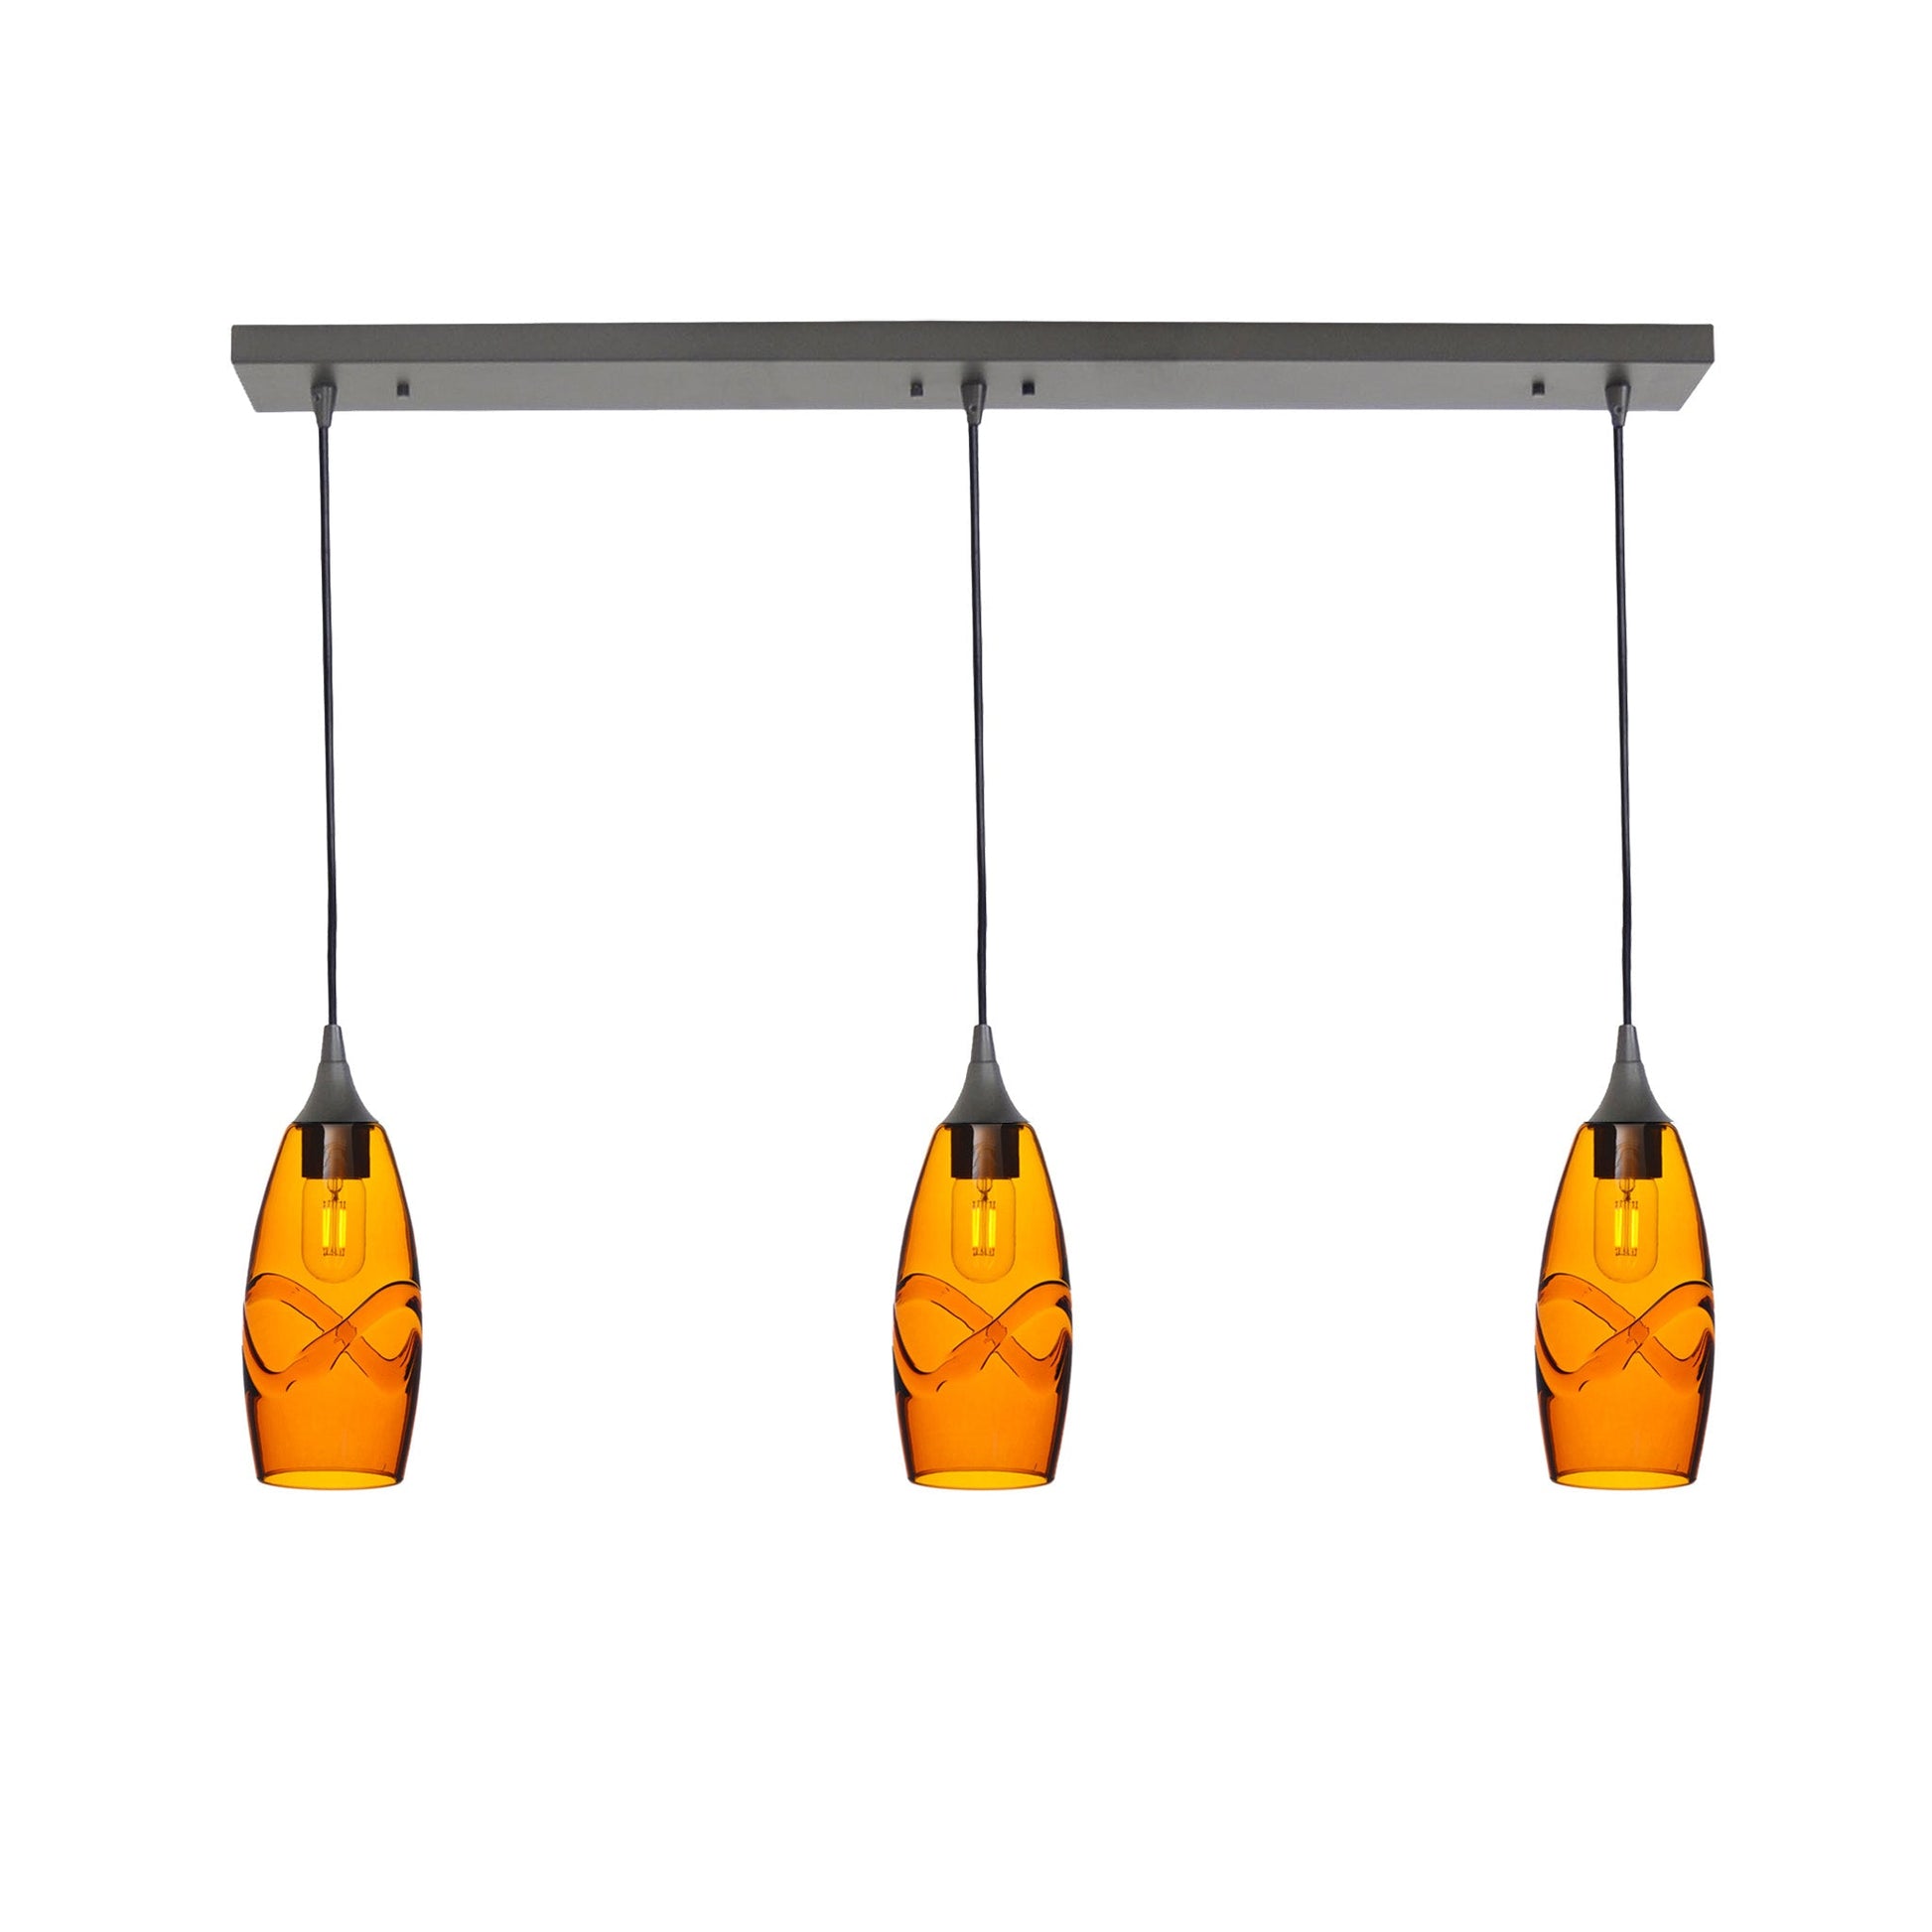 147 Swell: 3 Pendant Linear Chandelier-Glass-Bicycle Glass Co - Hotshop-Golden Amber-Antique Bronze-Bicycle Glass Co